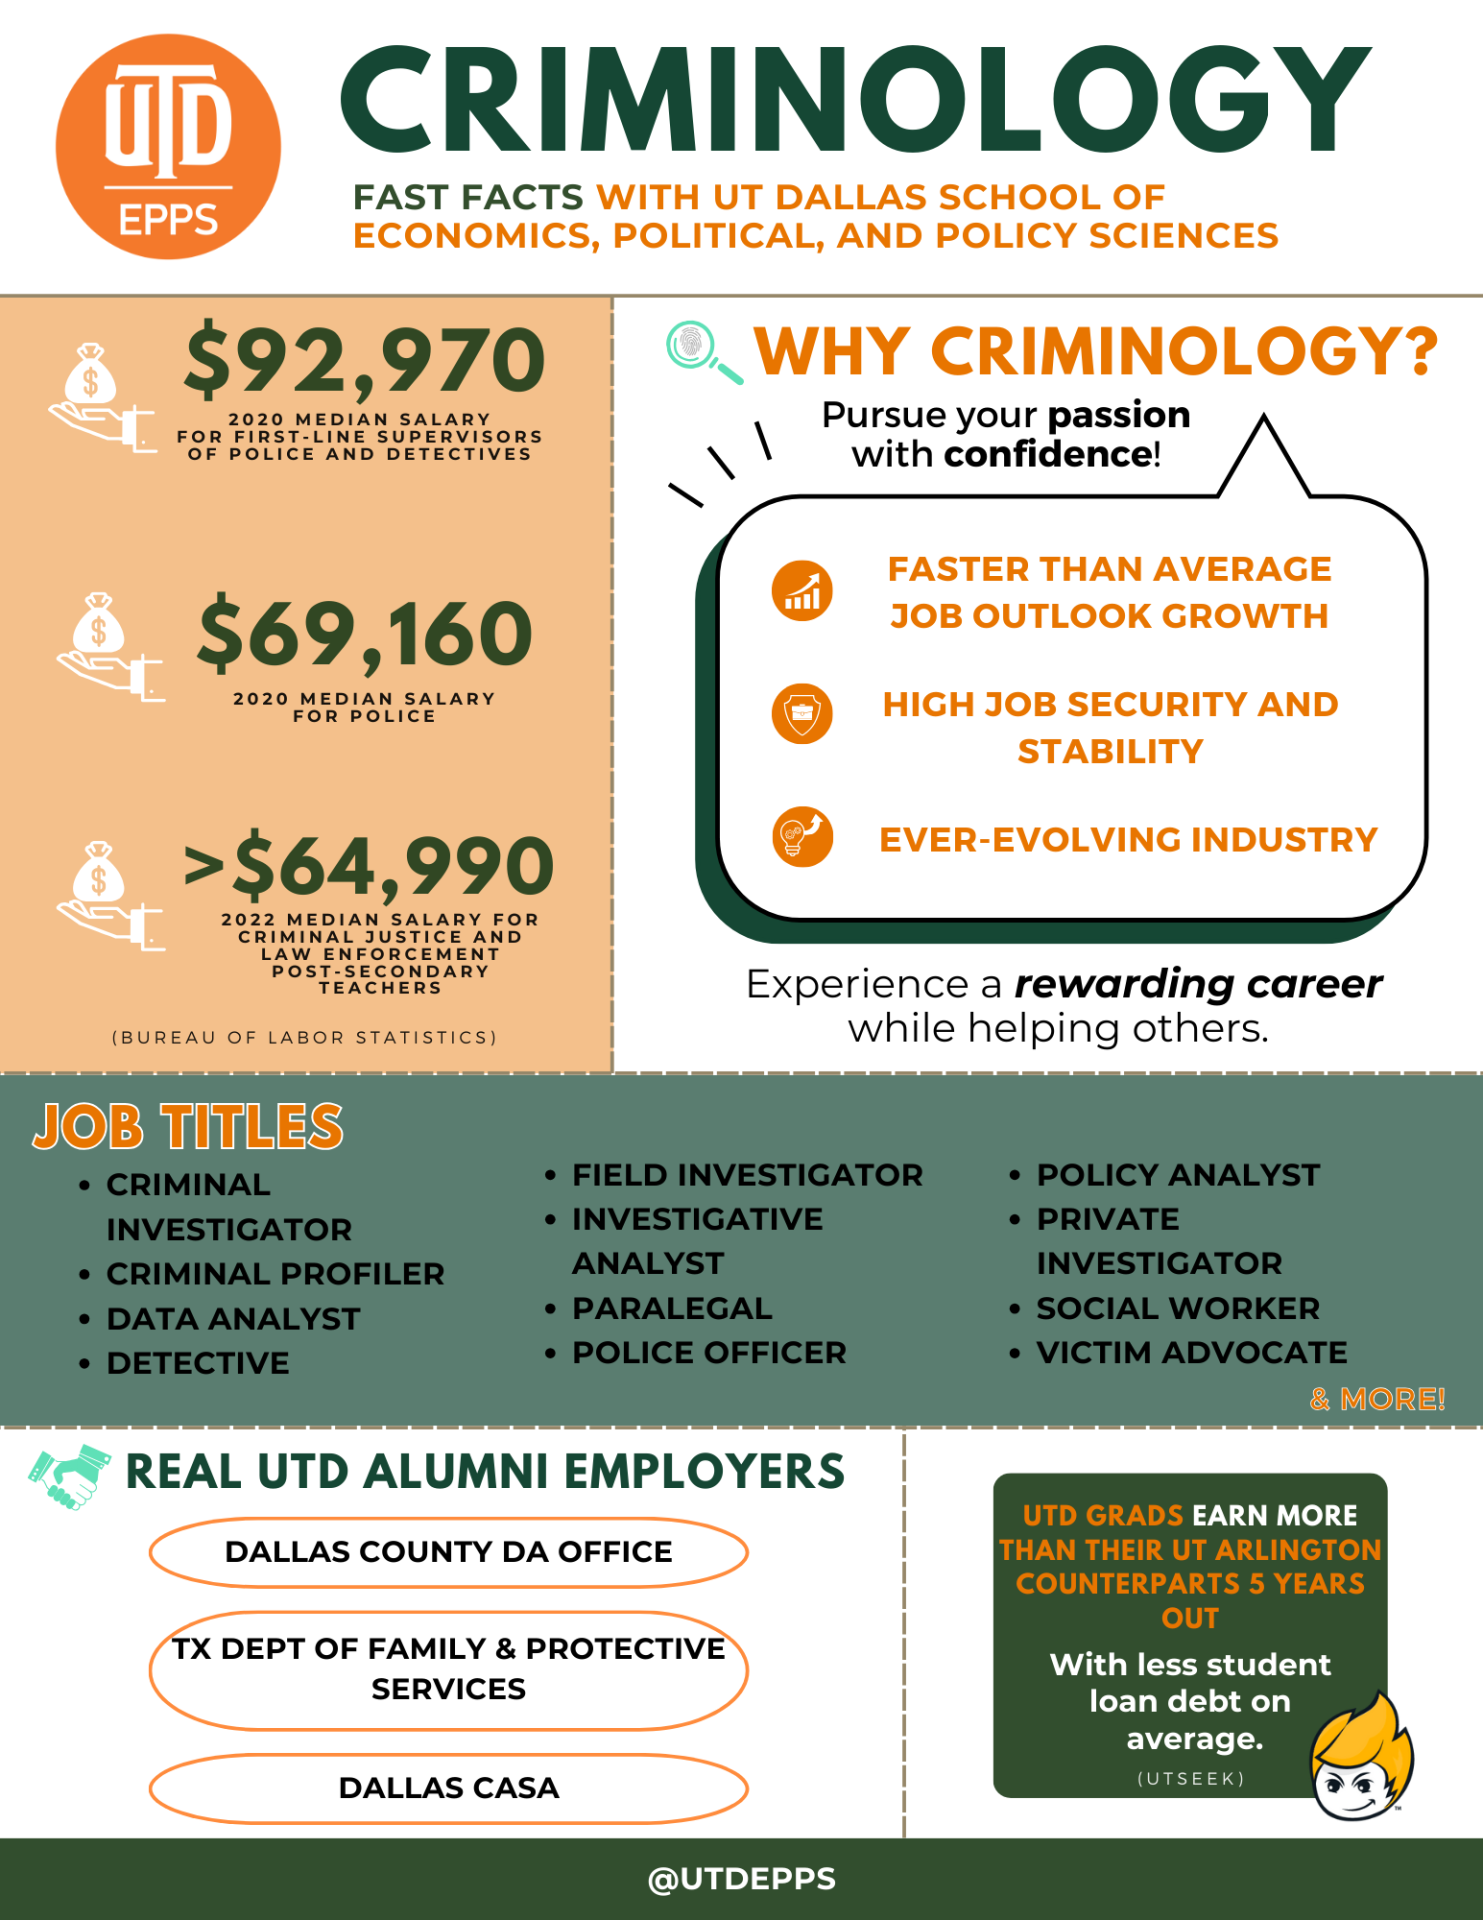 Criminology Fast Facts with Ut Dallas school of economics, political, and policy sciences. >,990 is the
2022 median salary For Criminal Justice and Law Enforcement 
post-secondary teachers.
,970 is the 2020 median salary
For first-line supervisors of police and detectives. ,160 is the 2020 median salary for police. The data is provided by the Bureau of Labor Statistics. 
WHY CRIMINOLOGY? Pursue your passion with confidence! FASTER THAN AVERAGE JOB OUTLOOK GROWTH. HIGH JOB SECURITY AND STABILITY. EVER-EVOLVING INDUSTRY. Experience a rewarding career while helping others. Job titles include:
CRIMINAL INVESTIGATOR
CRIMINAL PROFILER
DATA ANALYST
DETECTIVE
FIELD INVESTIGATOR
INVESTIGATIVE ANALYST
PARALEGAL
POLICE OFFICER
POLICY ANALYST
PRIVATE INVESTIGATOR
SOCIAL WORKER
VICTIM ADVOCATE
& MORE!
Real utd alumni employers include:
DALLAS COUNTY DA OFFICE
TX DEPT OF FAMILY & PROTECTIVE SERVICES
DALLAS CASA
UTD grads earn more than their UT Arlington counterparts 5 years out
With less student 
loan debt on 
average. Data is from UTseek. @UTDEPPS